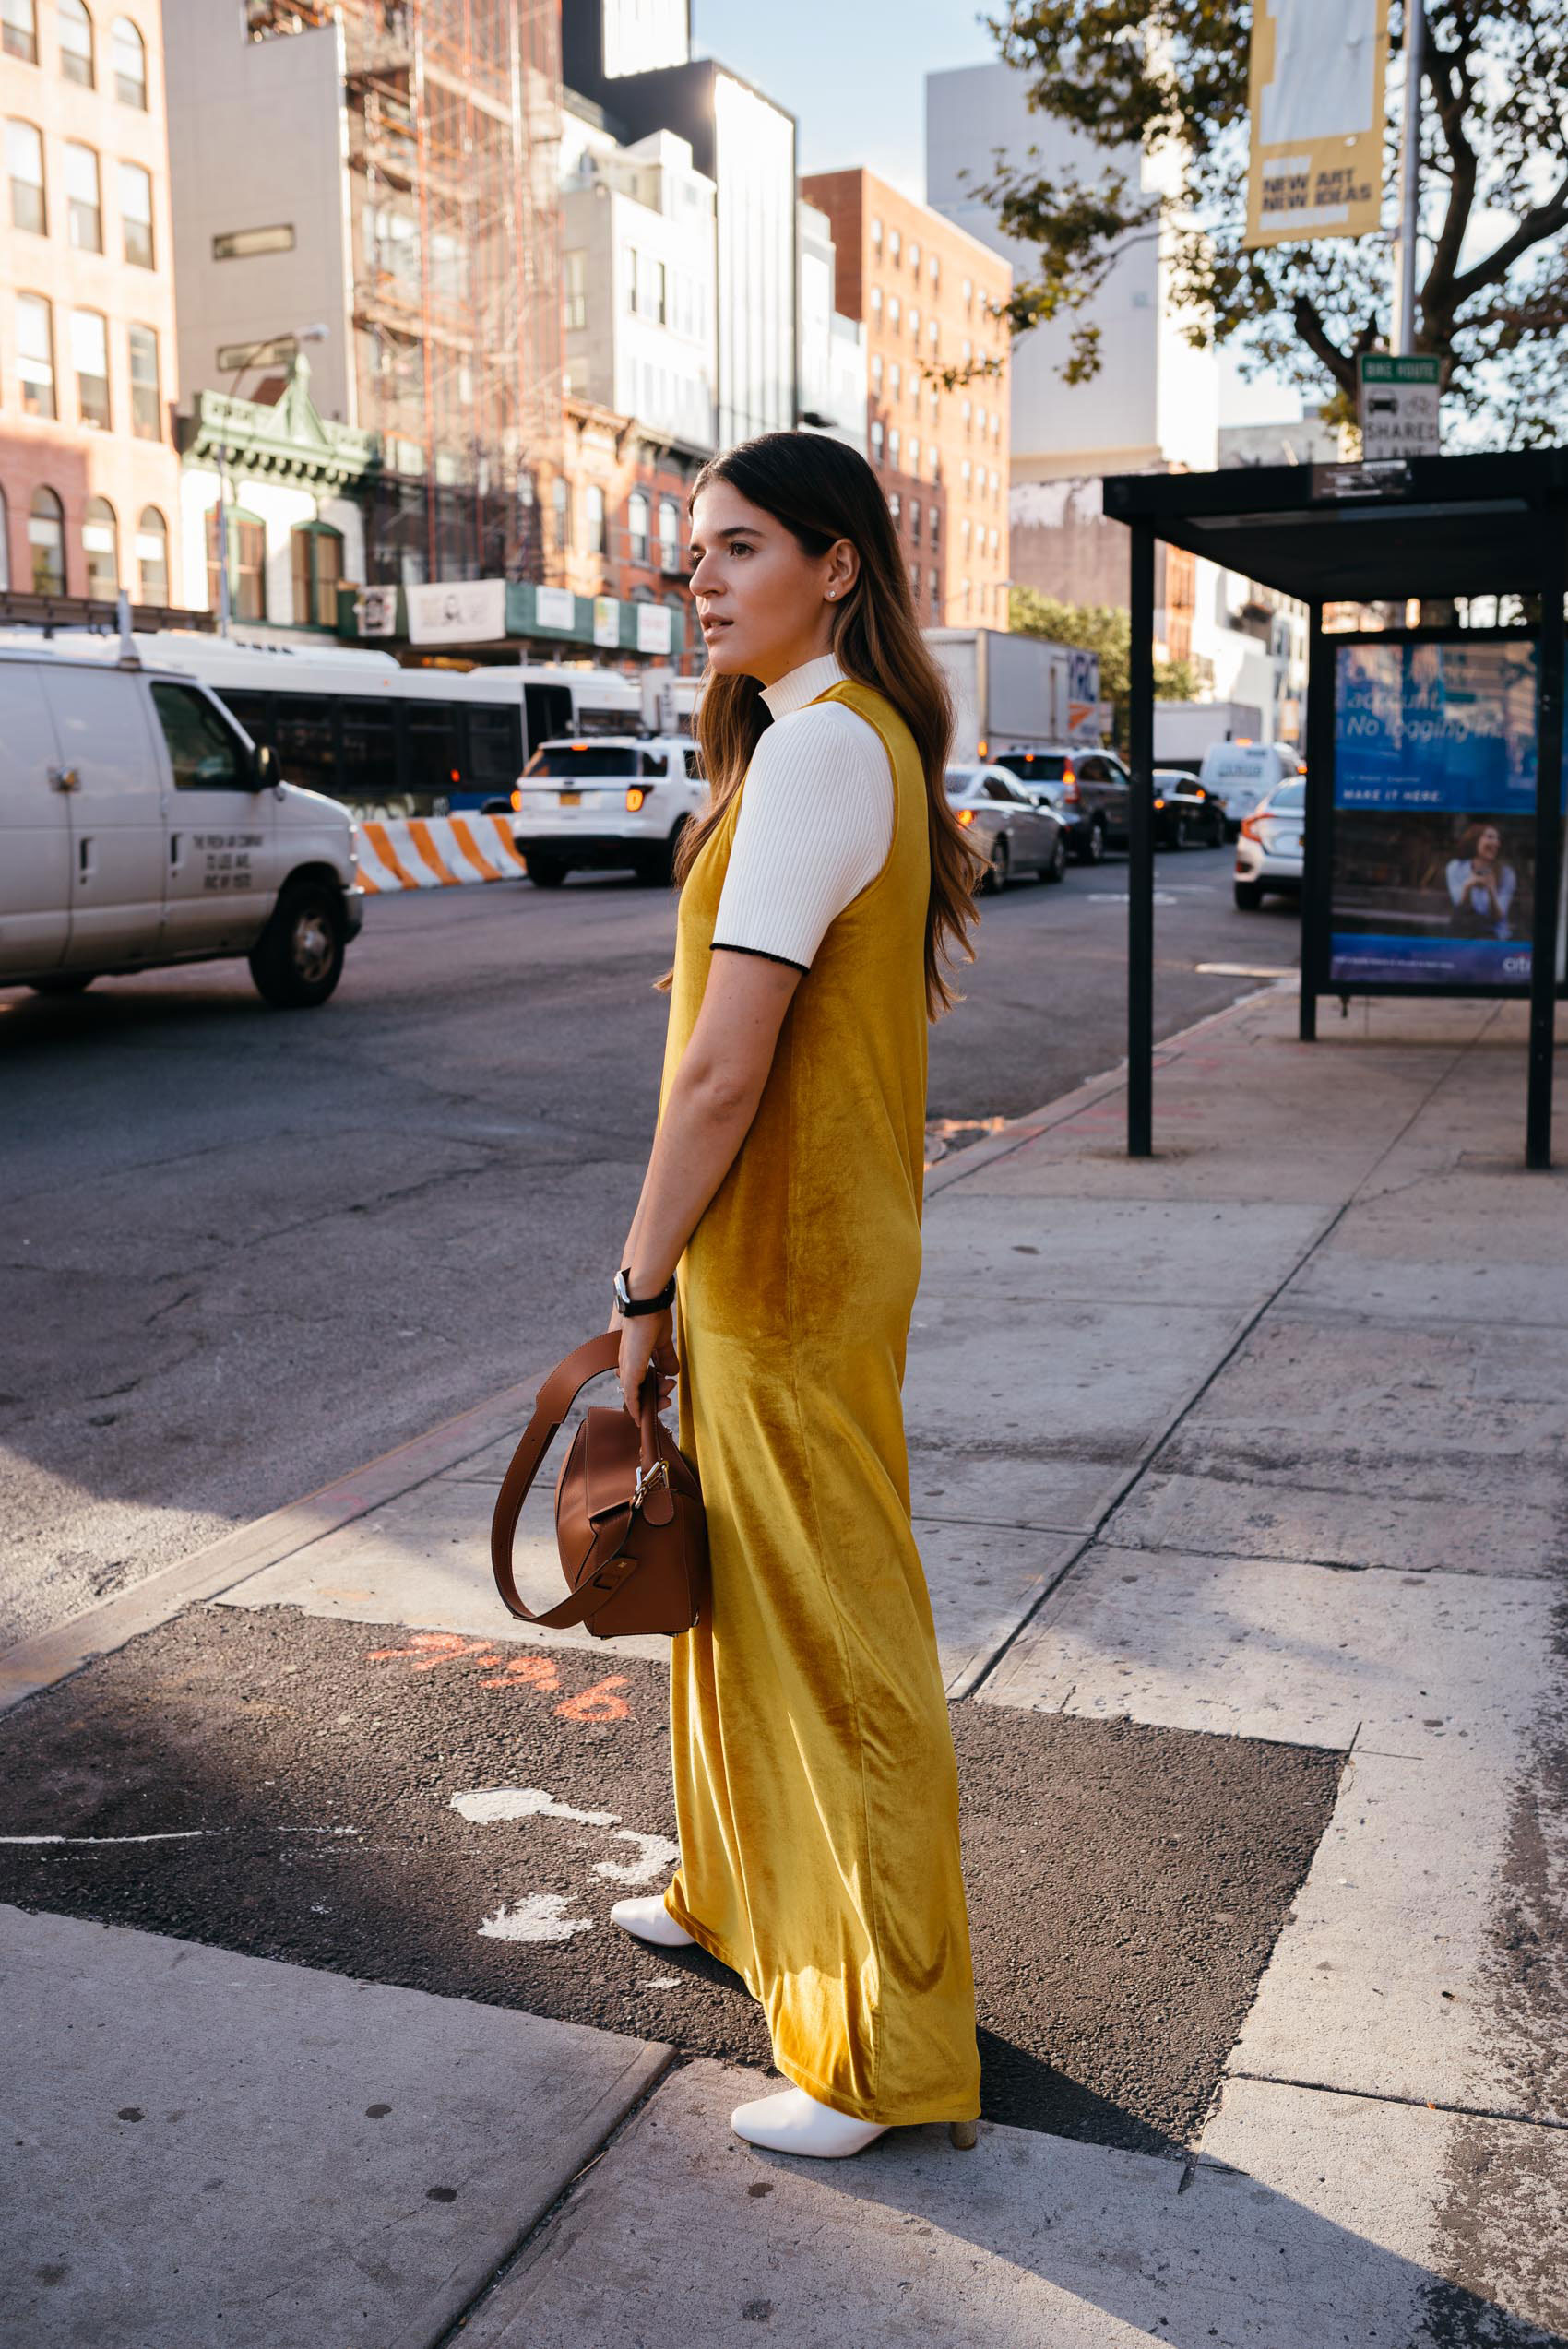 Maristella in New York wearing a velver gold jumpsuit and knit top from Zara, Uterqüe boots and Loewe Puzzle bag